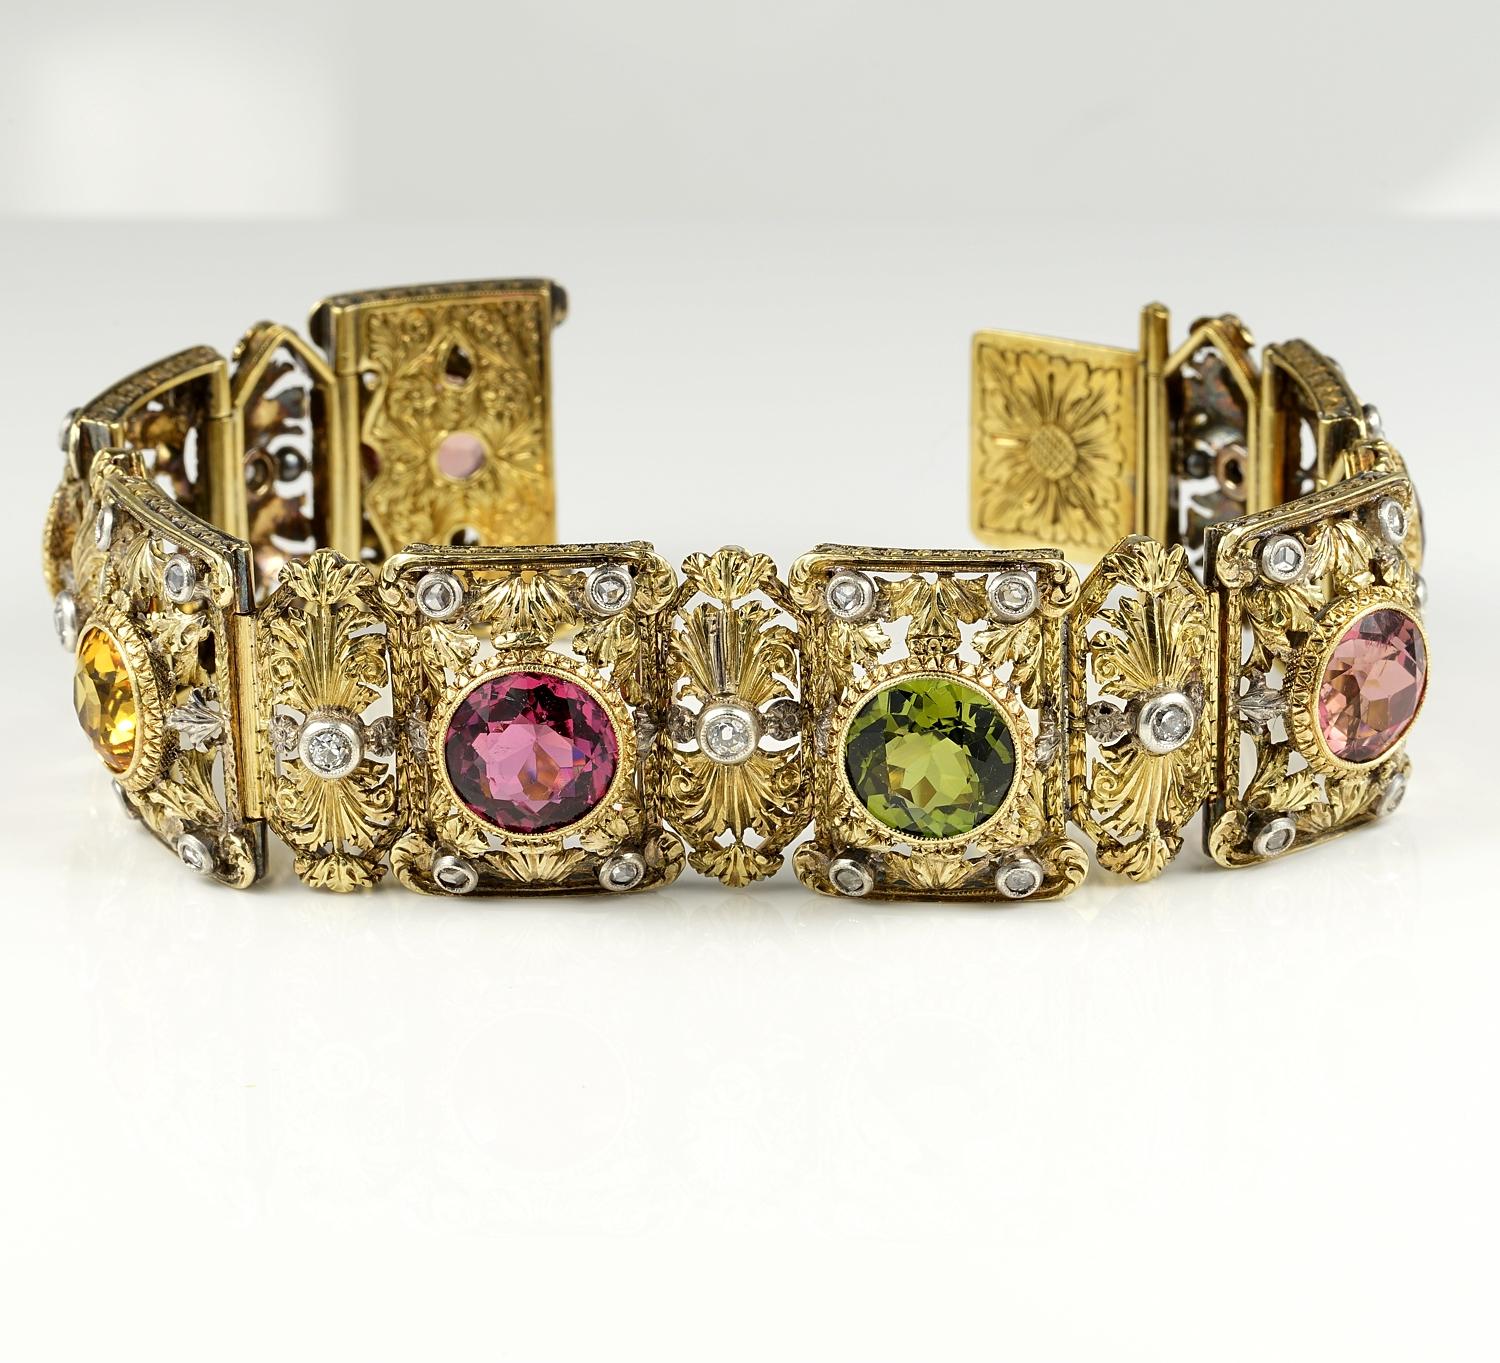 This magnificent Edwardian era bracelet loaded with 36.00 Ct of coloured gemstones, untreated and totally natural
It displays extraordinary workmanship of the period, superb and intricate work of leaf and scroll work making it quite an unique
Hand